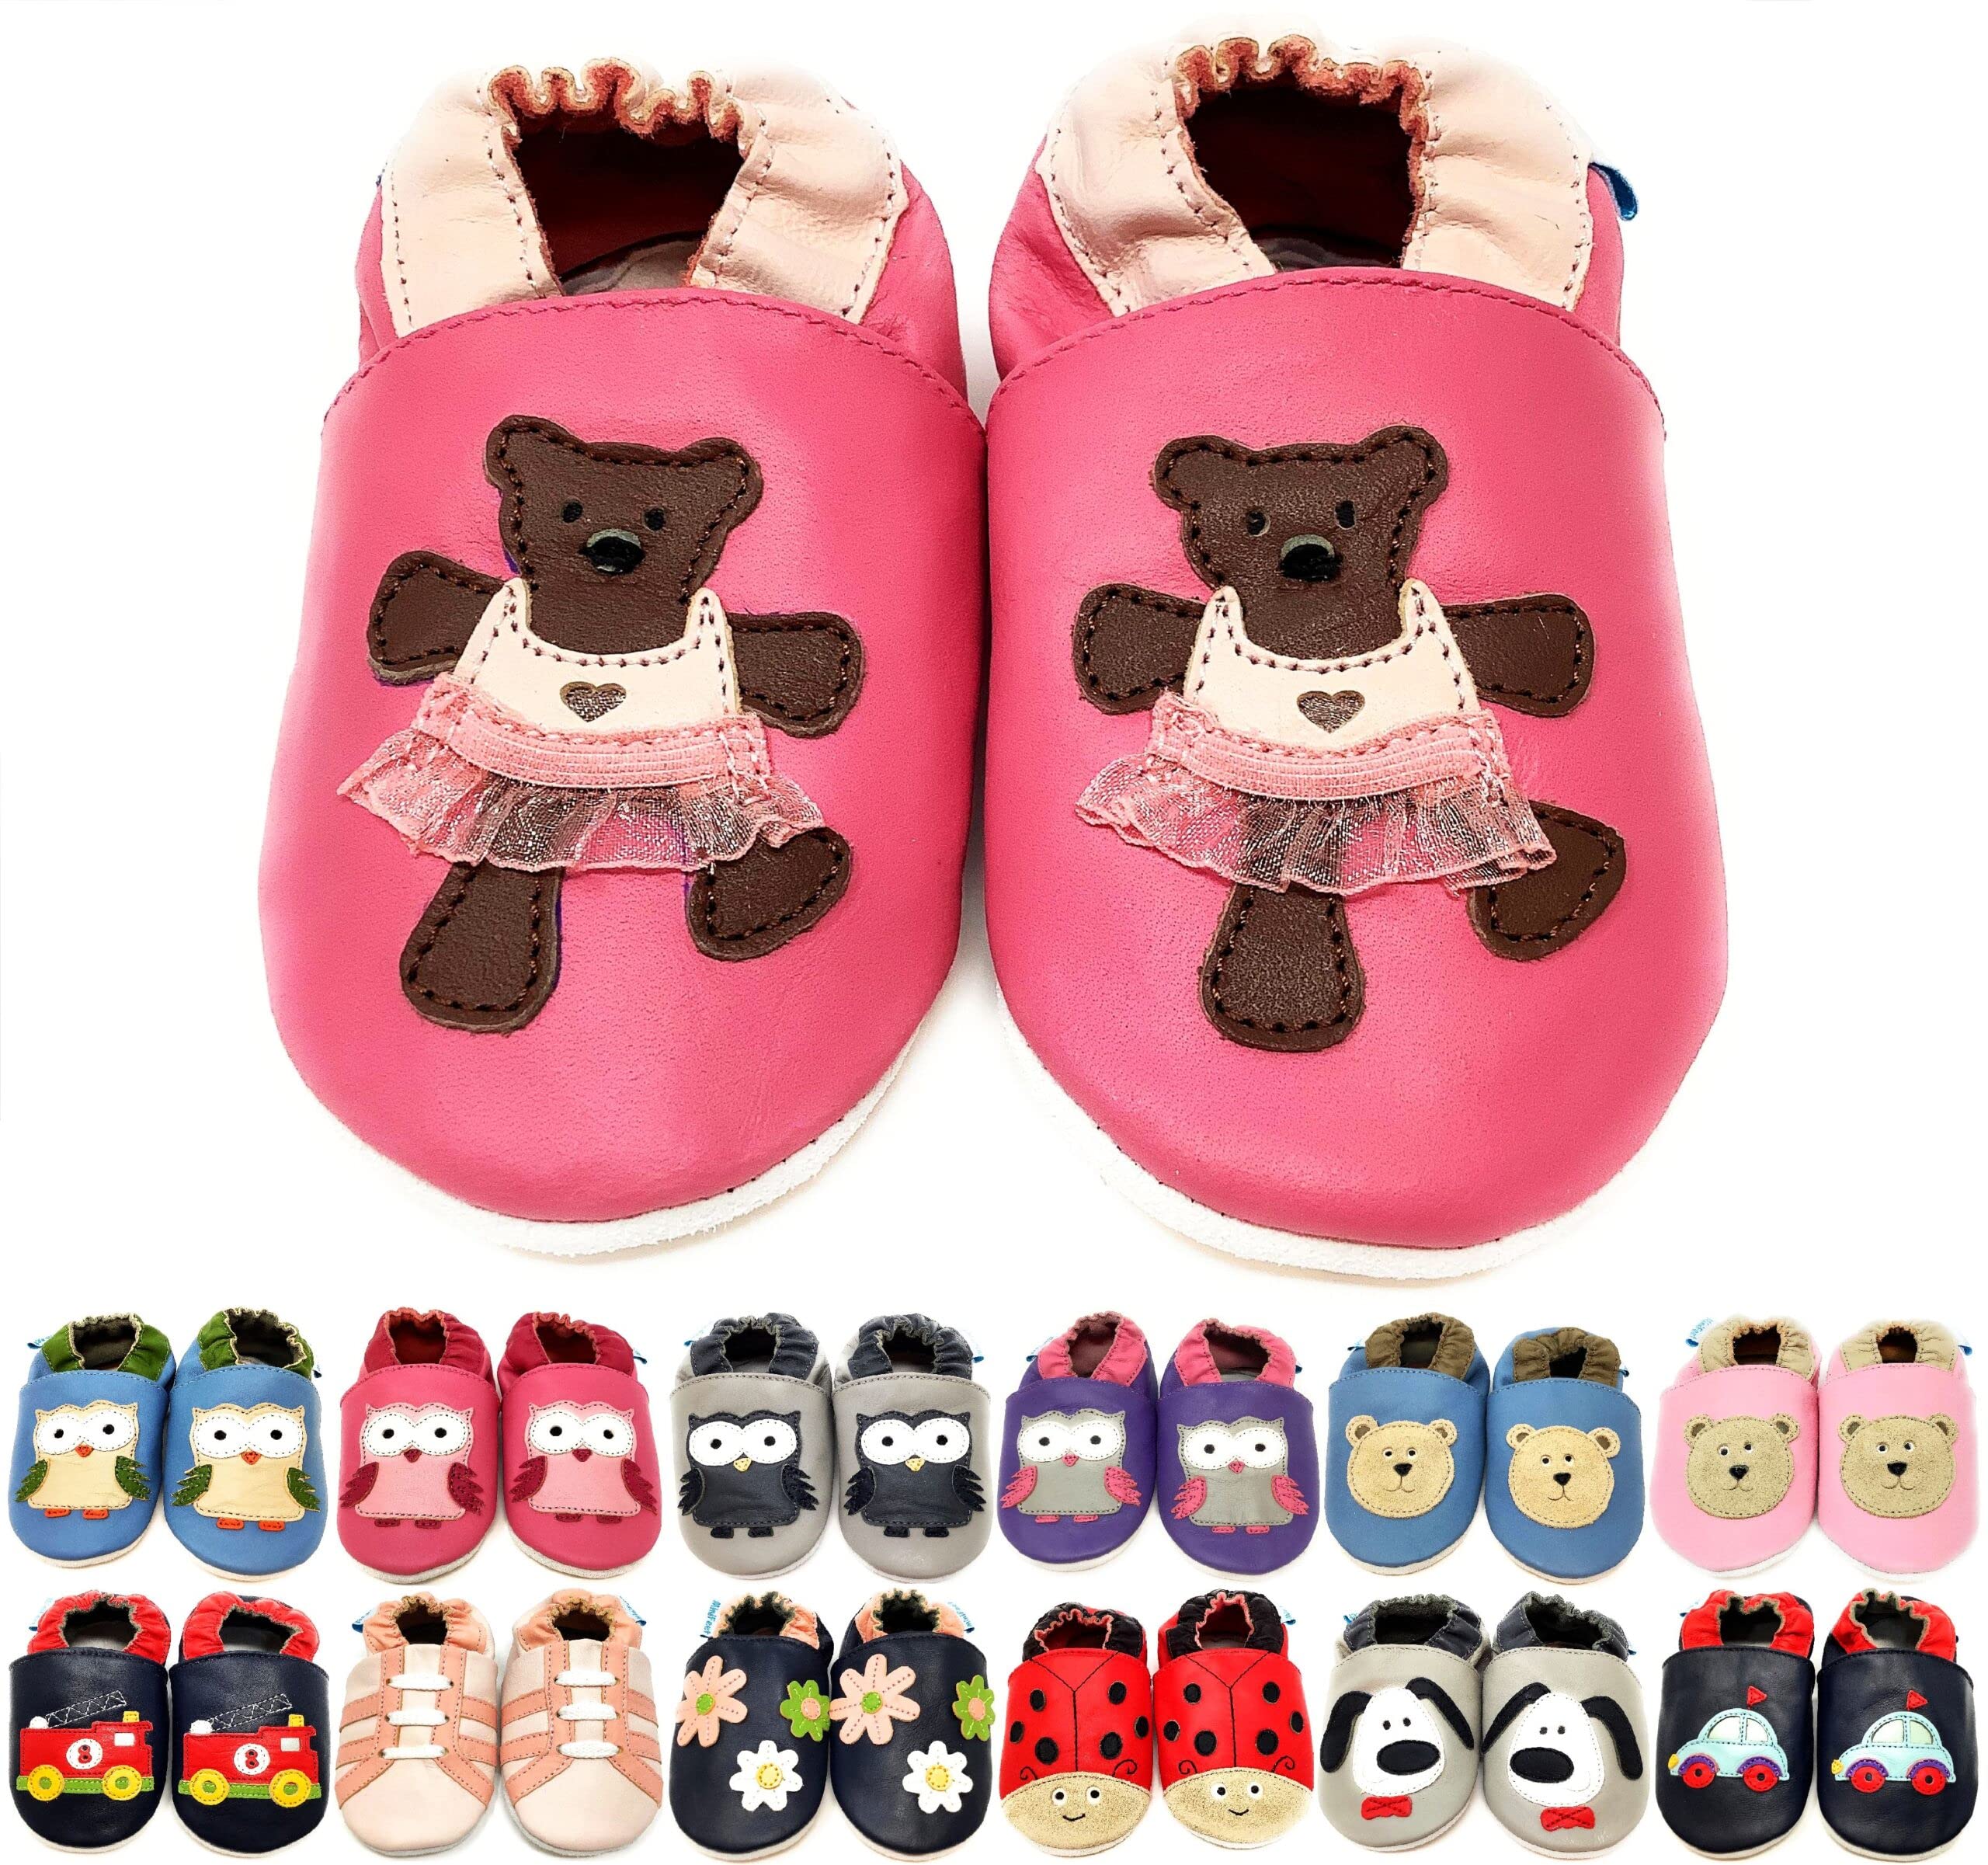 Soft Leather Baby Shoes - Minifeet - Soft Leather Baby Shoes